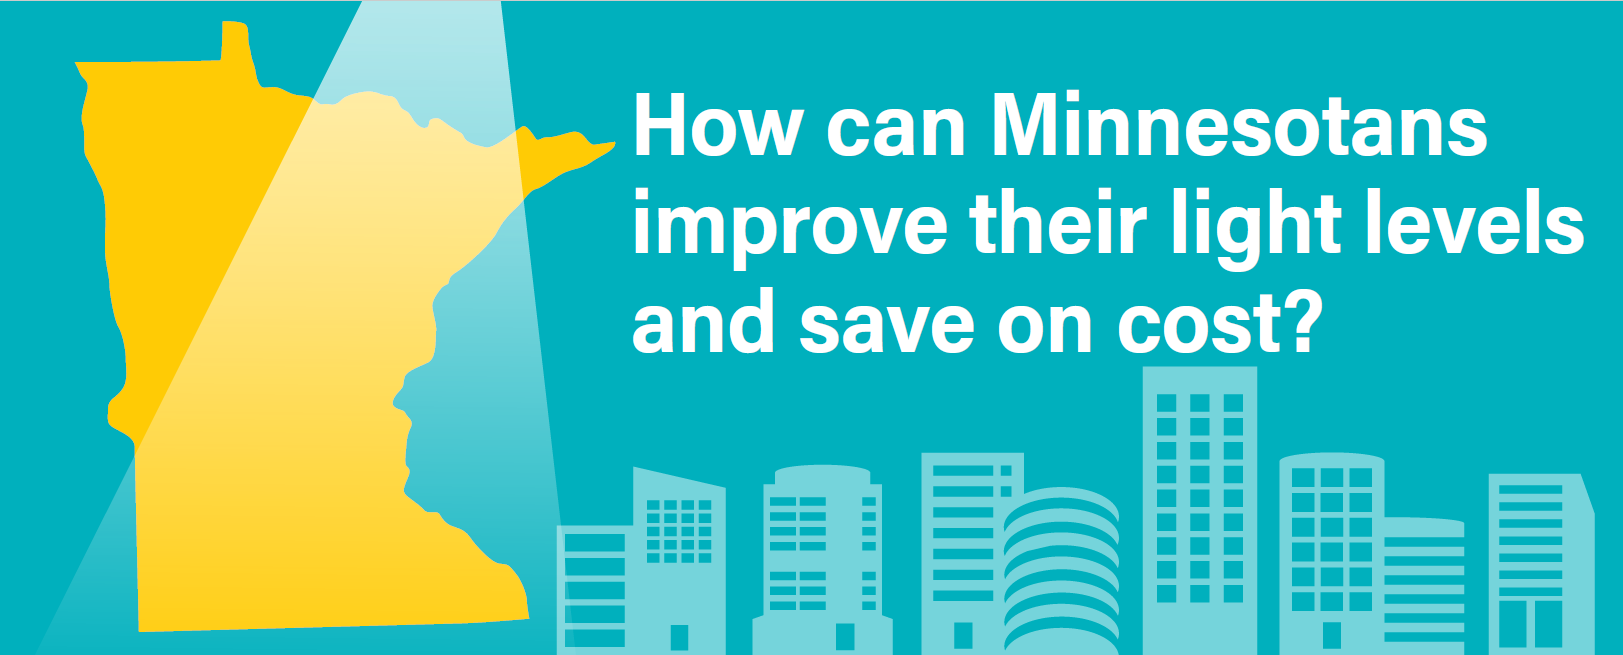 How can Minnesotans improve their light levels and save on cost?